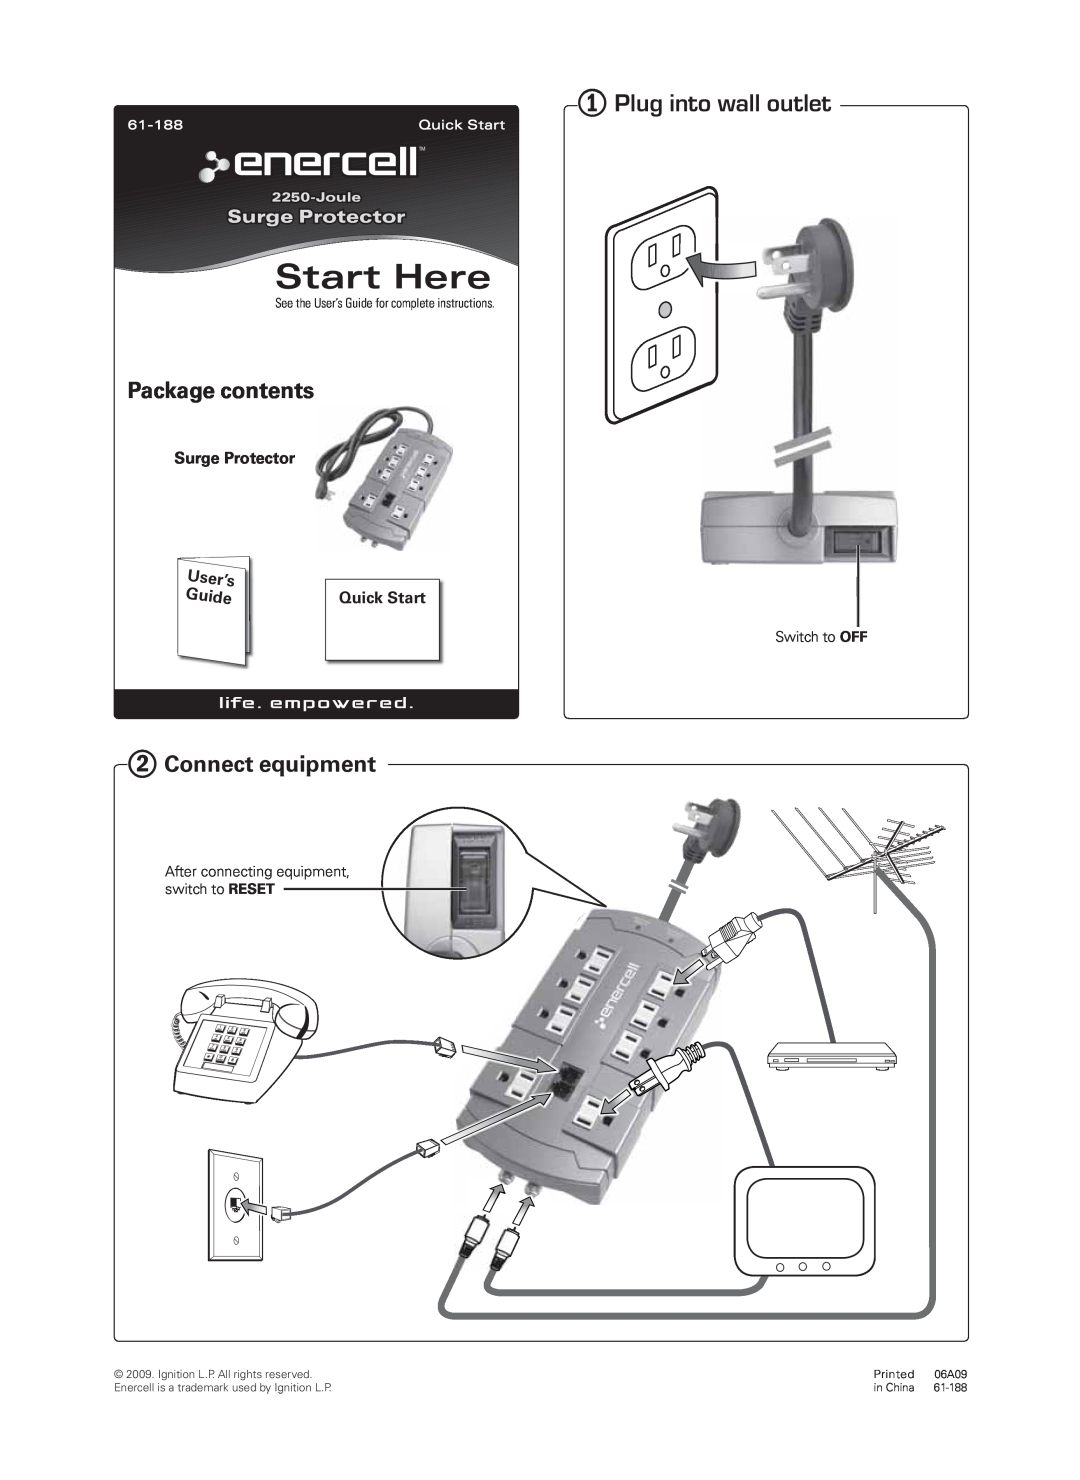 Radio Shack 61-188 quick start Start Here,  Plug into wall outlet, Package contents,  Connect equipment, Surge Protector 